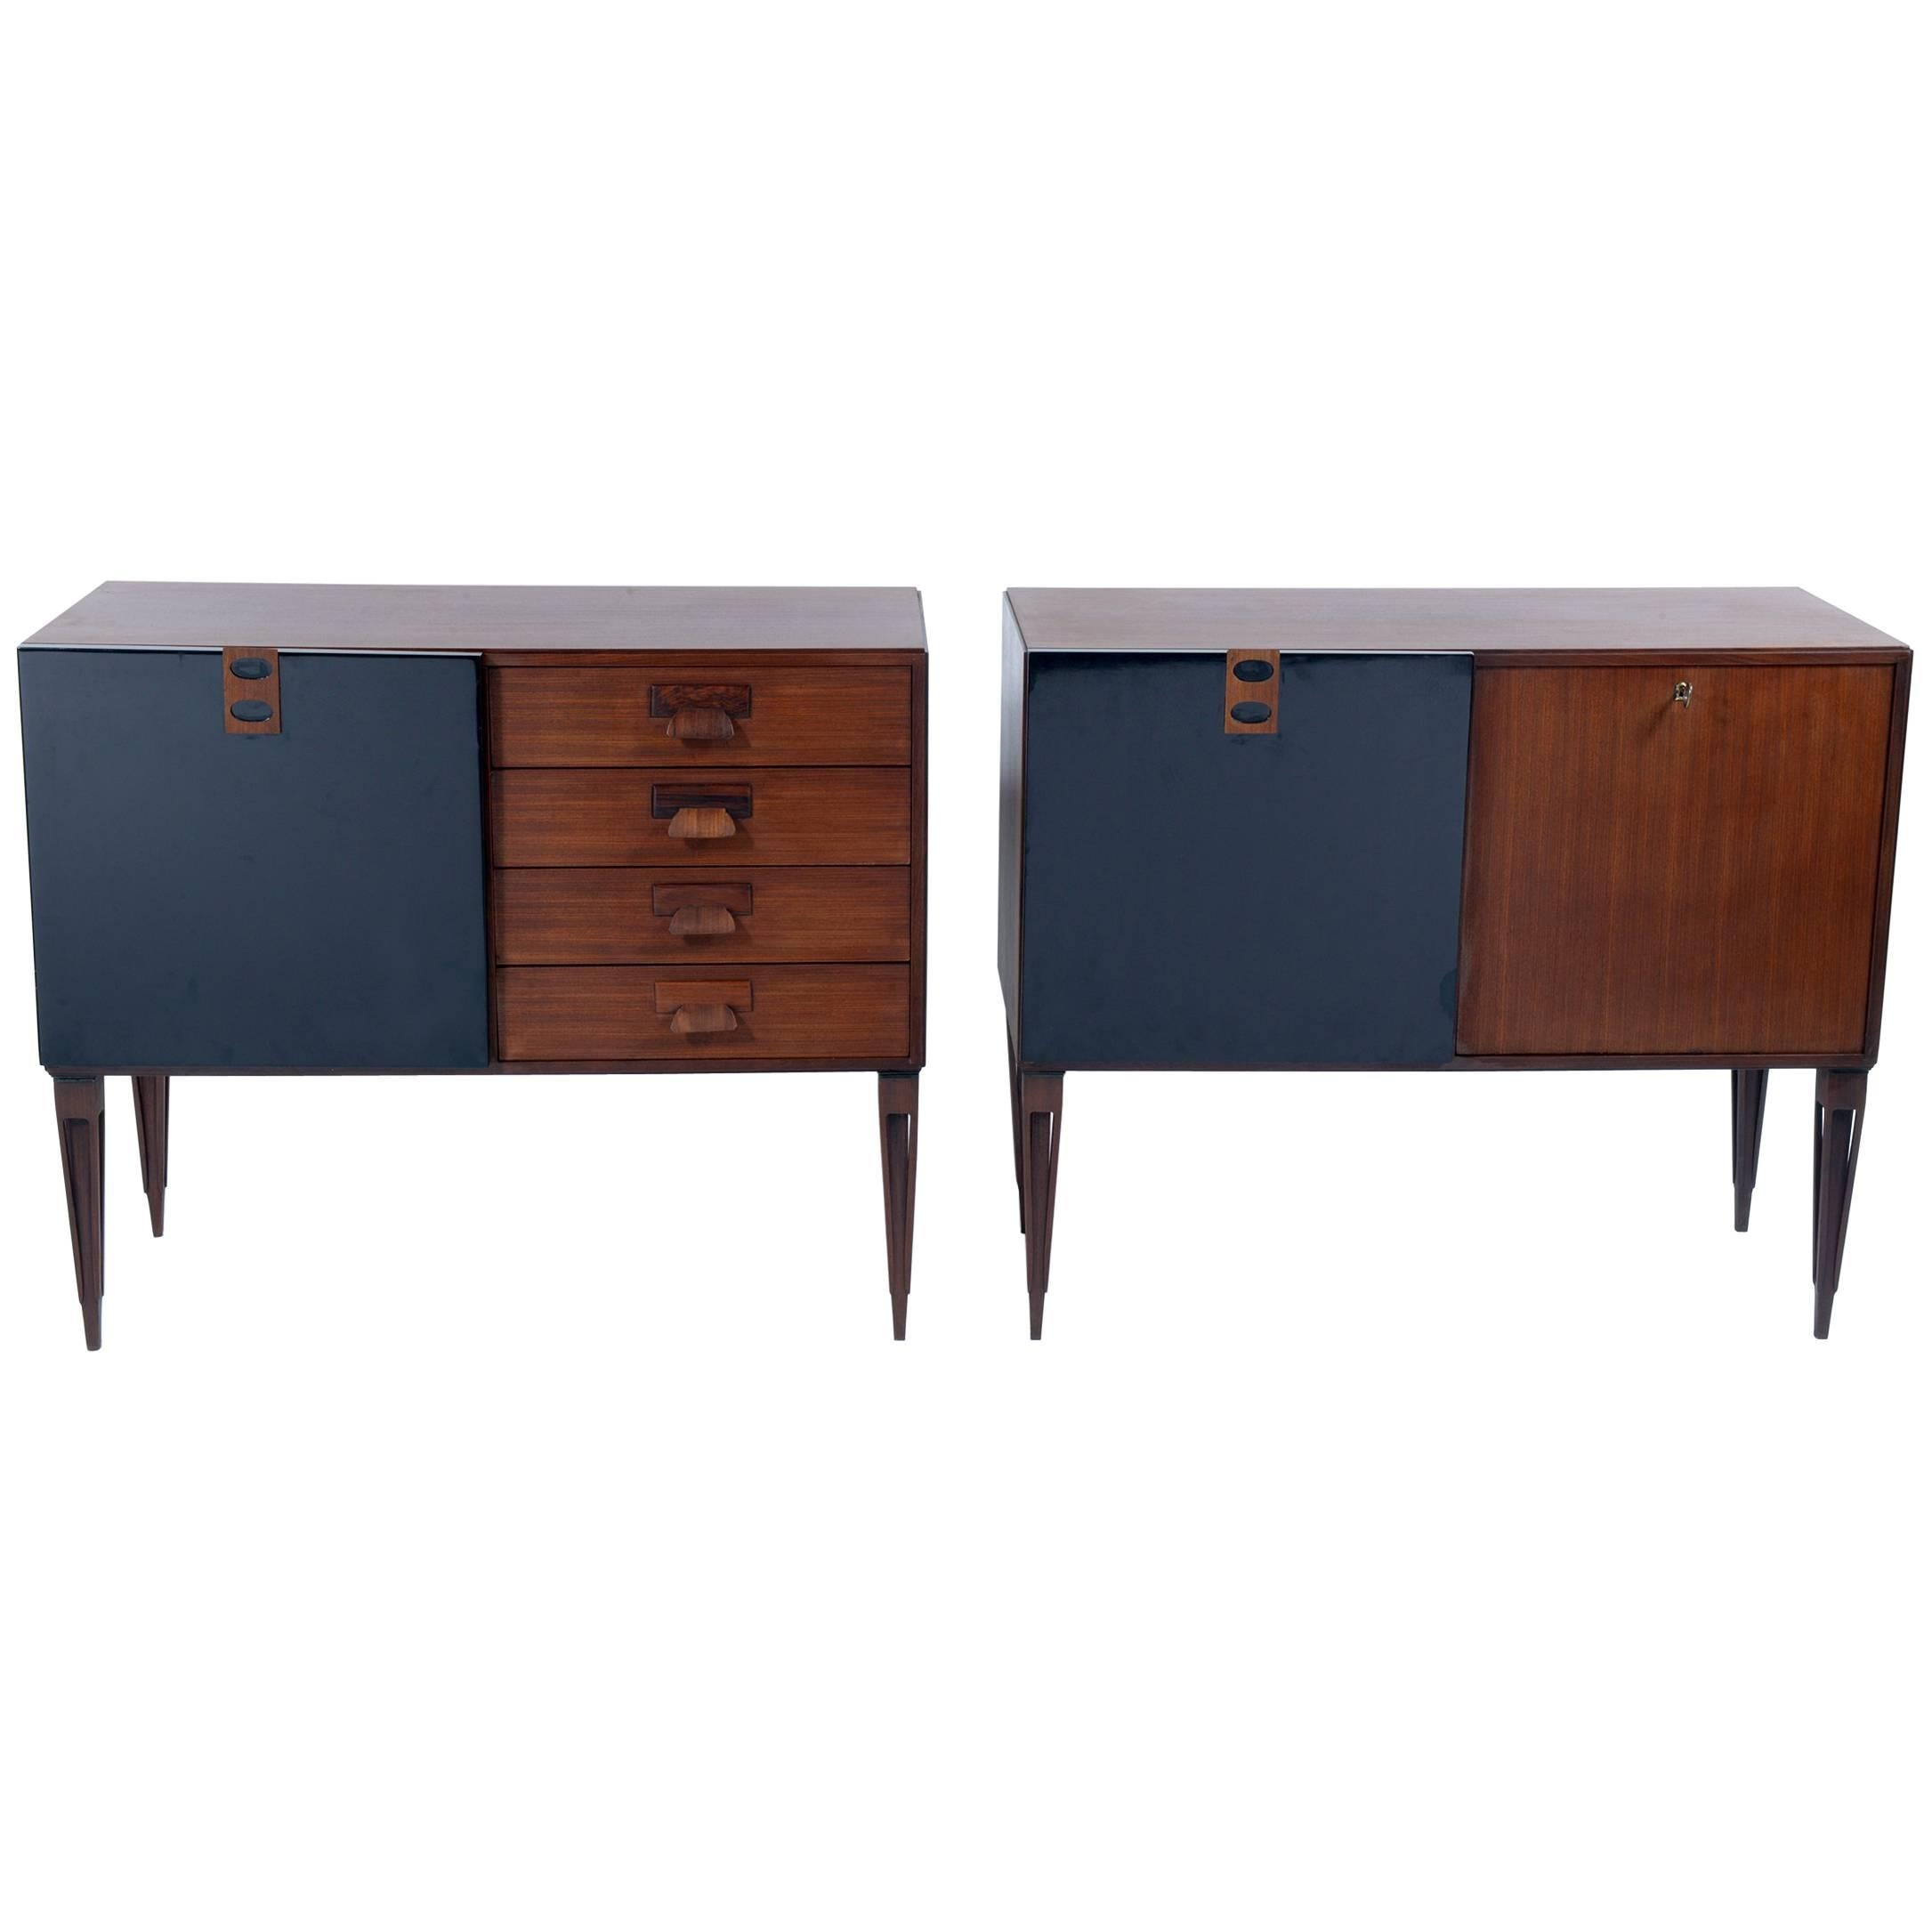 Pair of Mid Century Cabinet-Sideboard by F.lli Proserpio, Signed